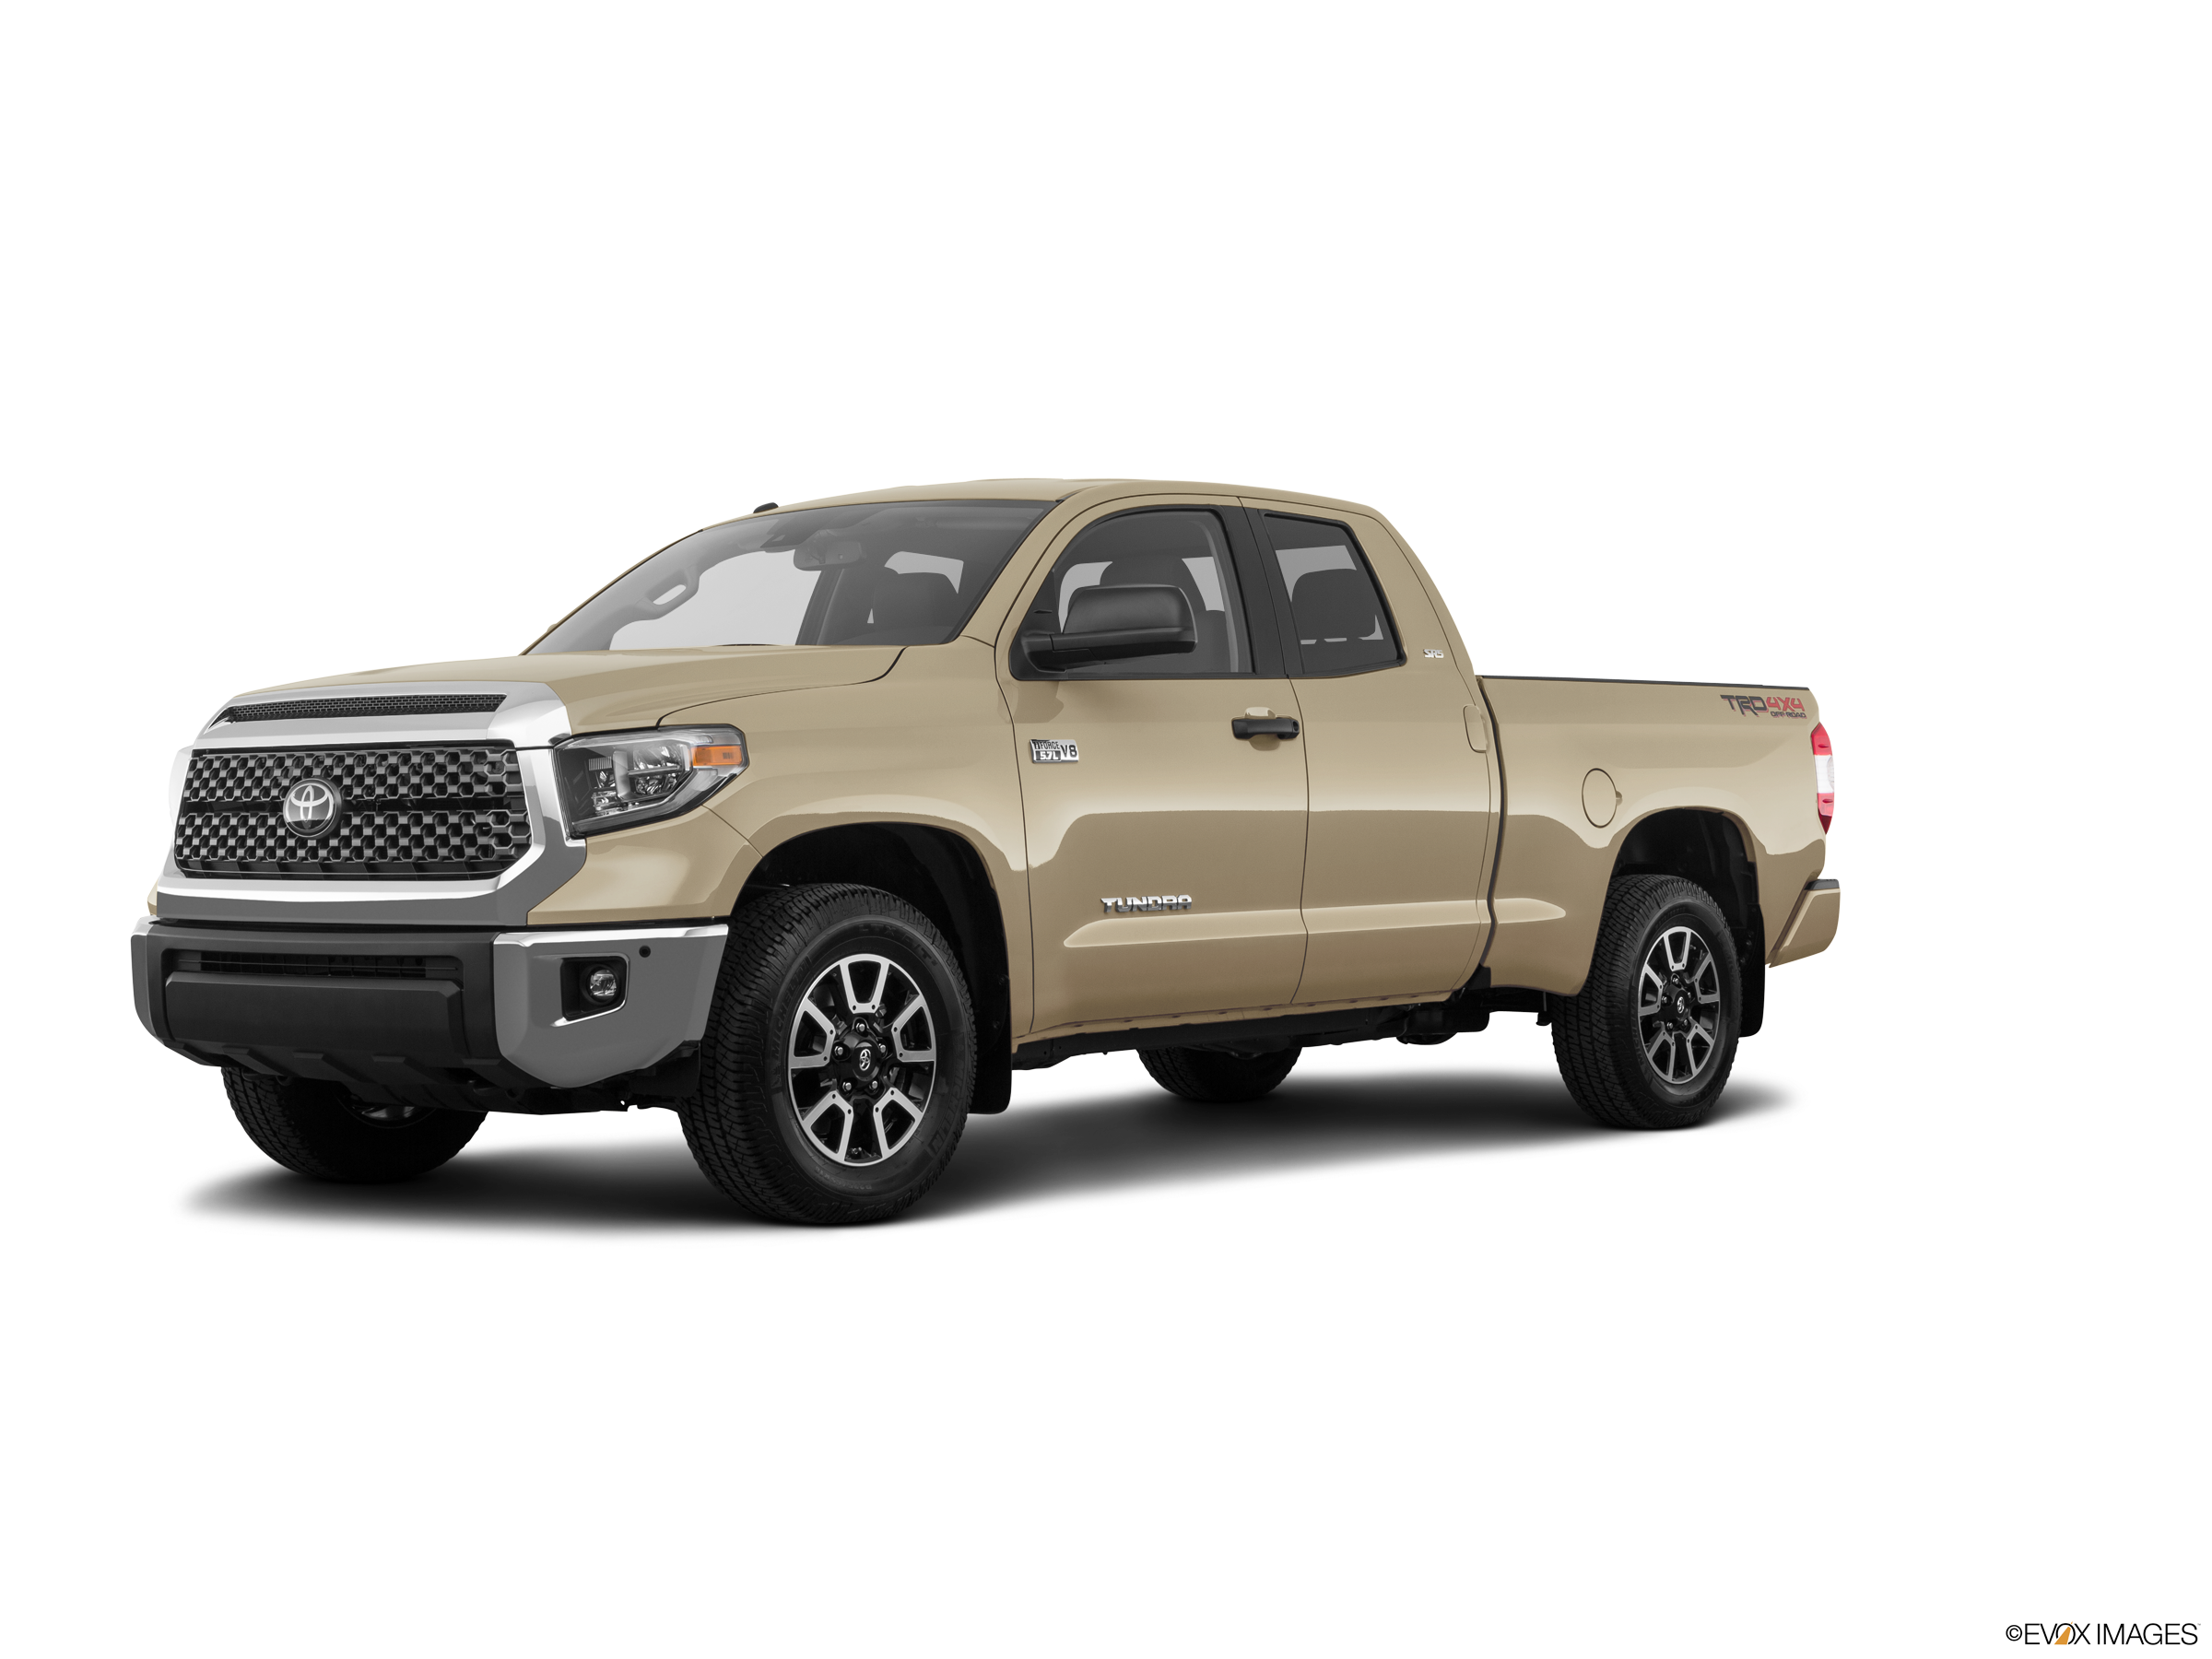 New 2019 Toyota Tundra Double Cab Sr5 Pricing Kelley Blue Book